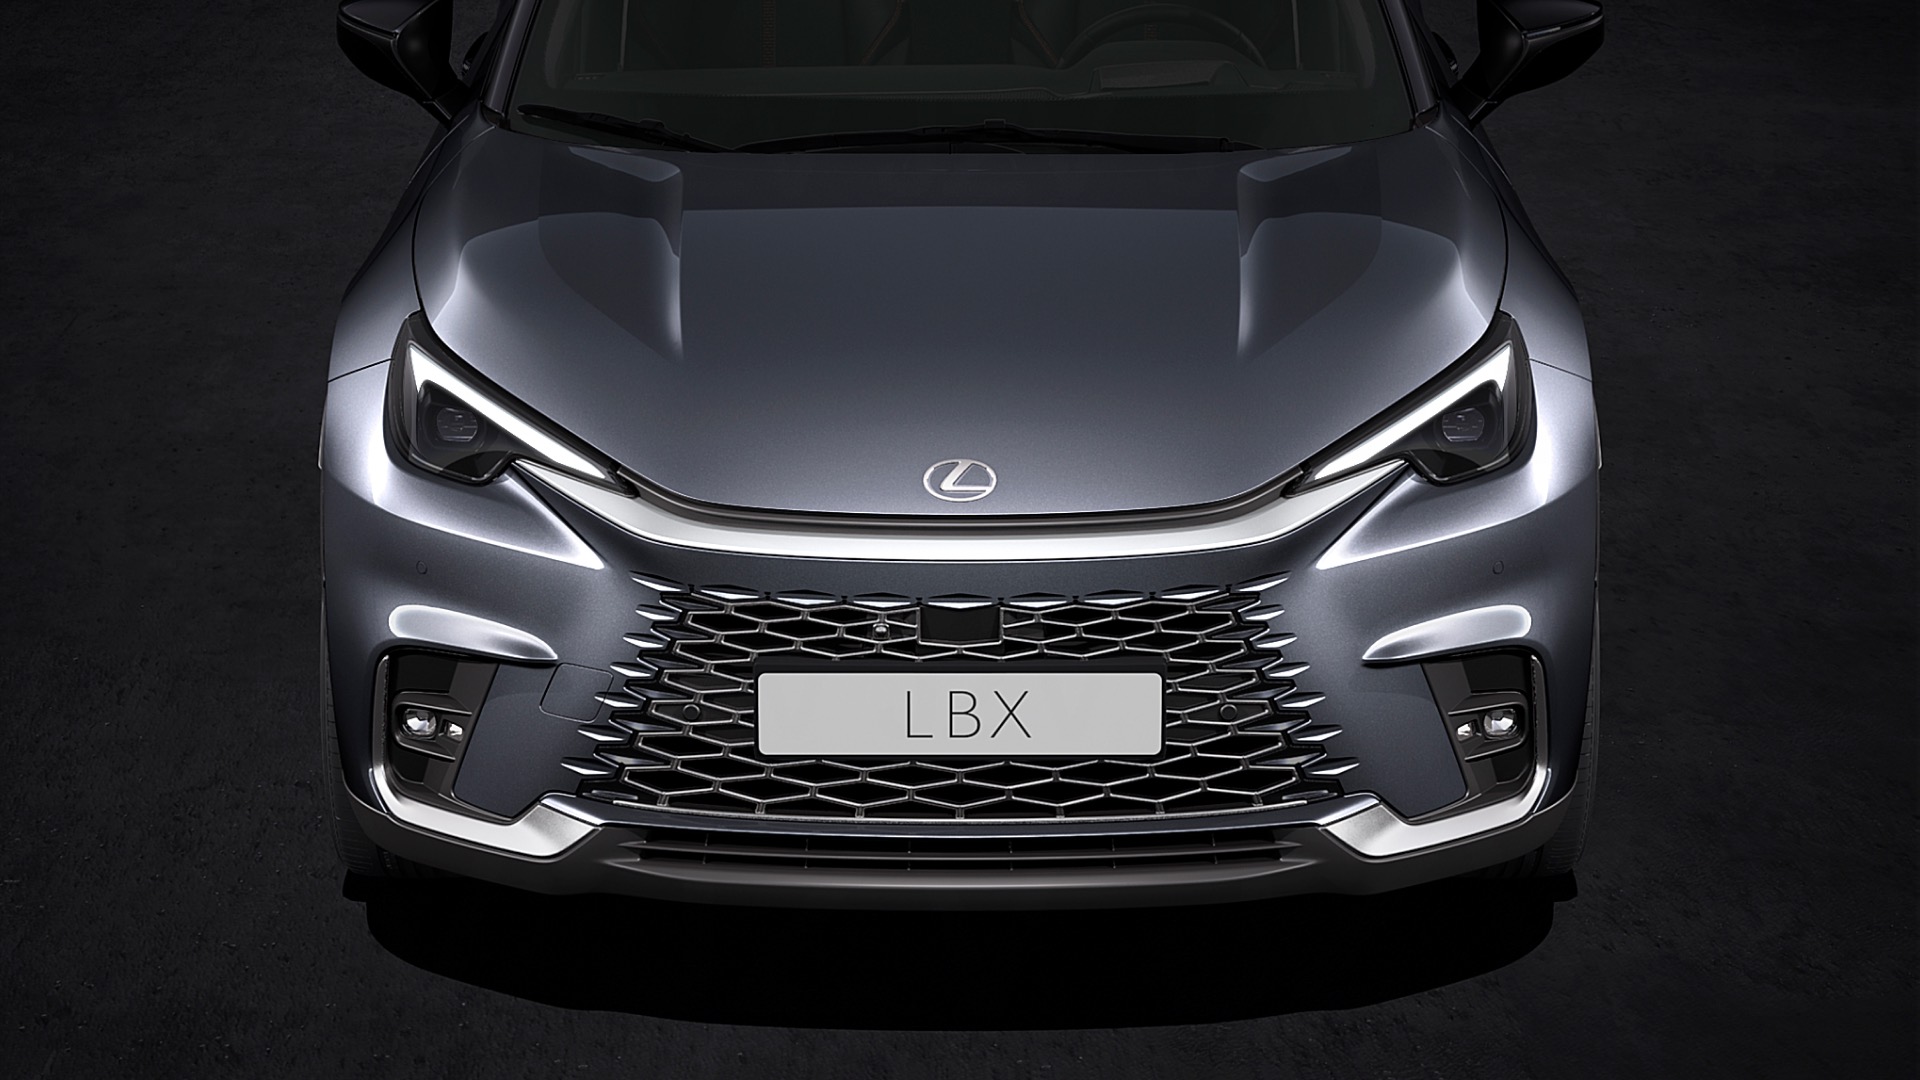 Front bonnet and spindle grille of the Lexus LBX prototype.